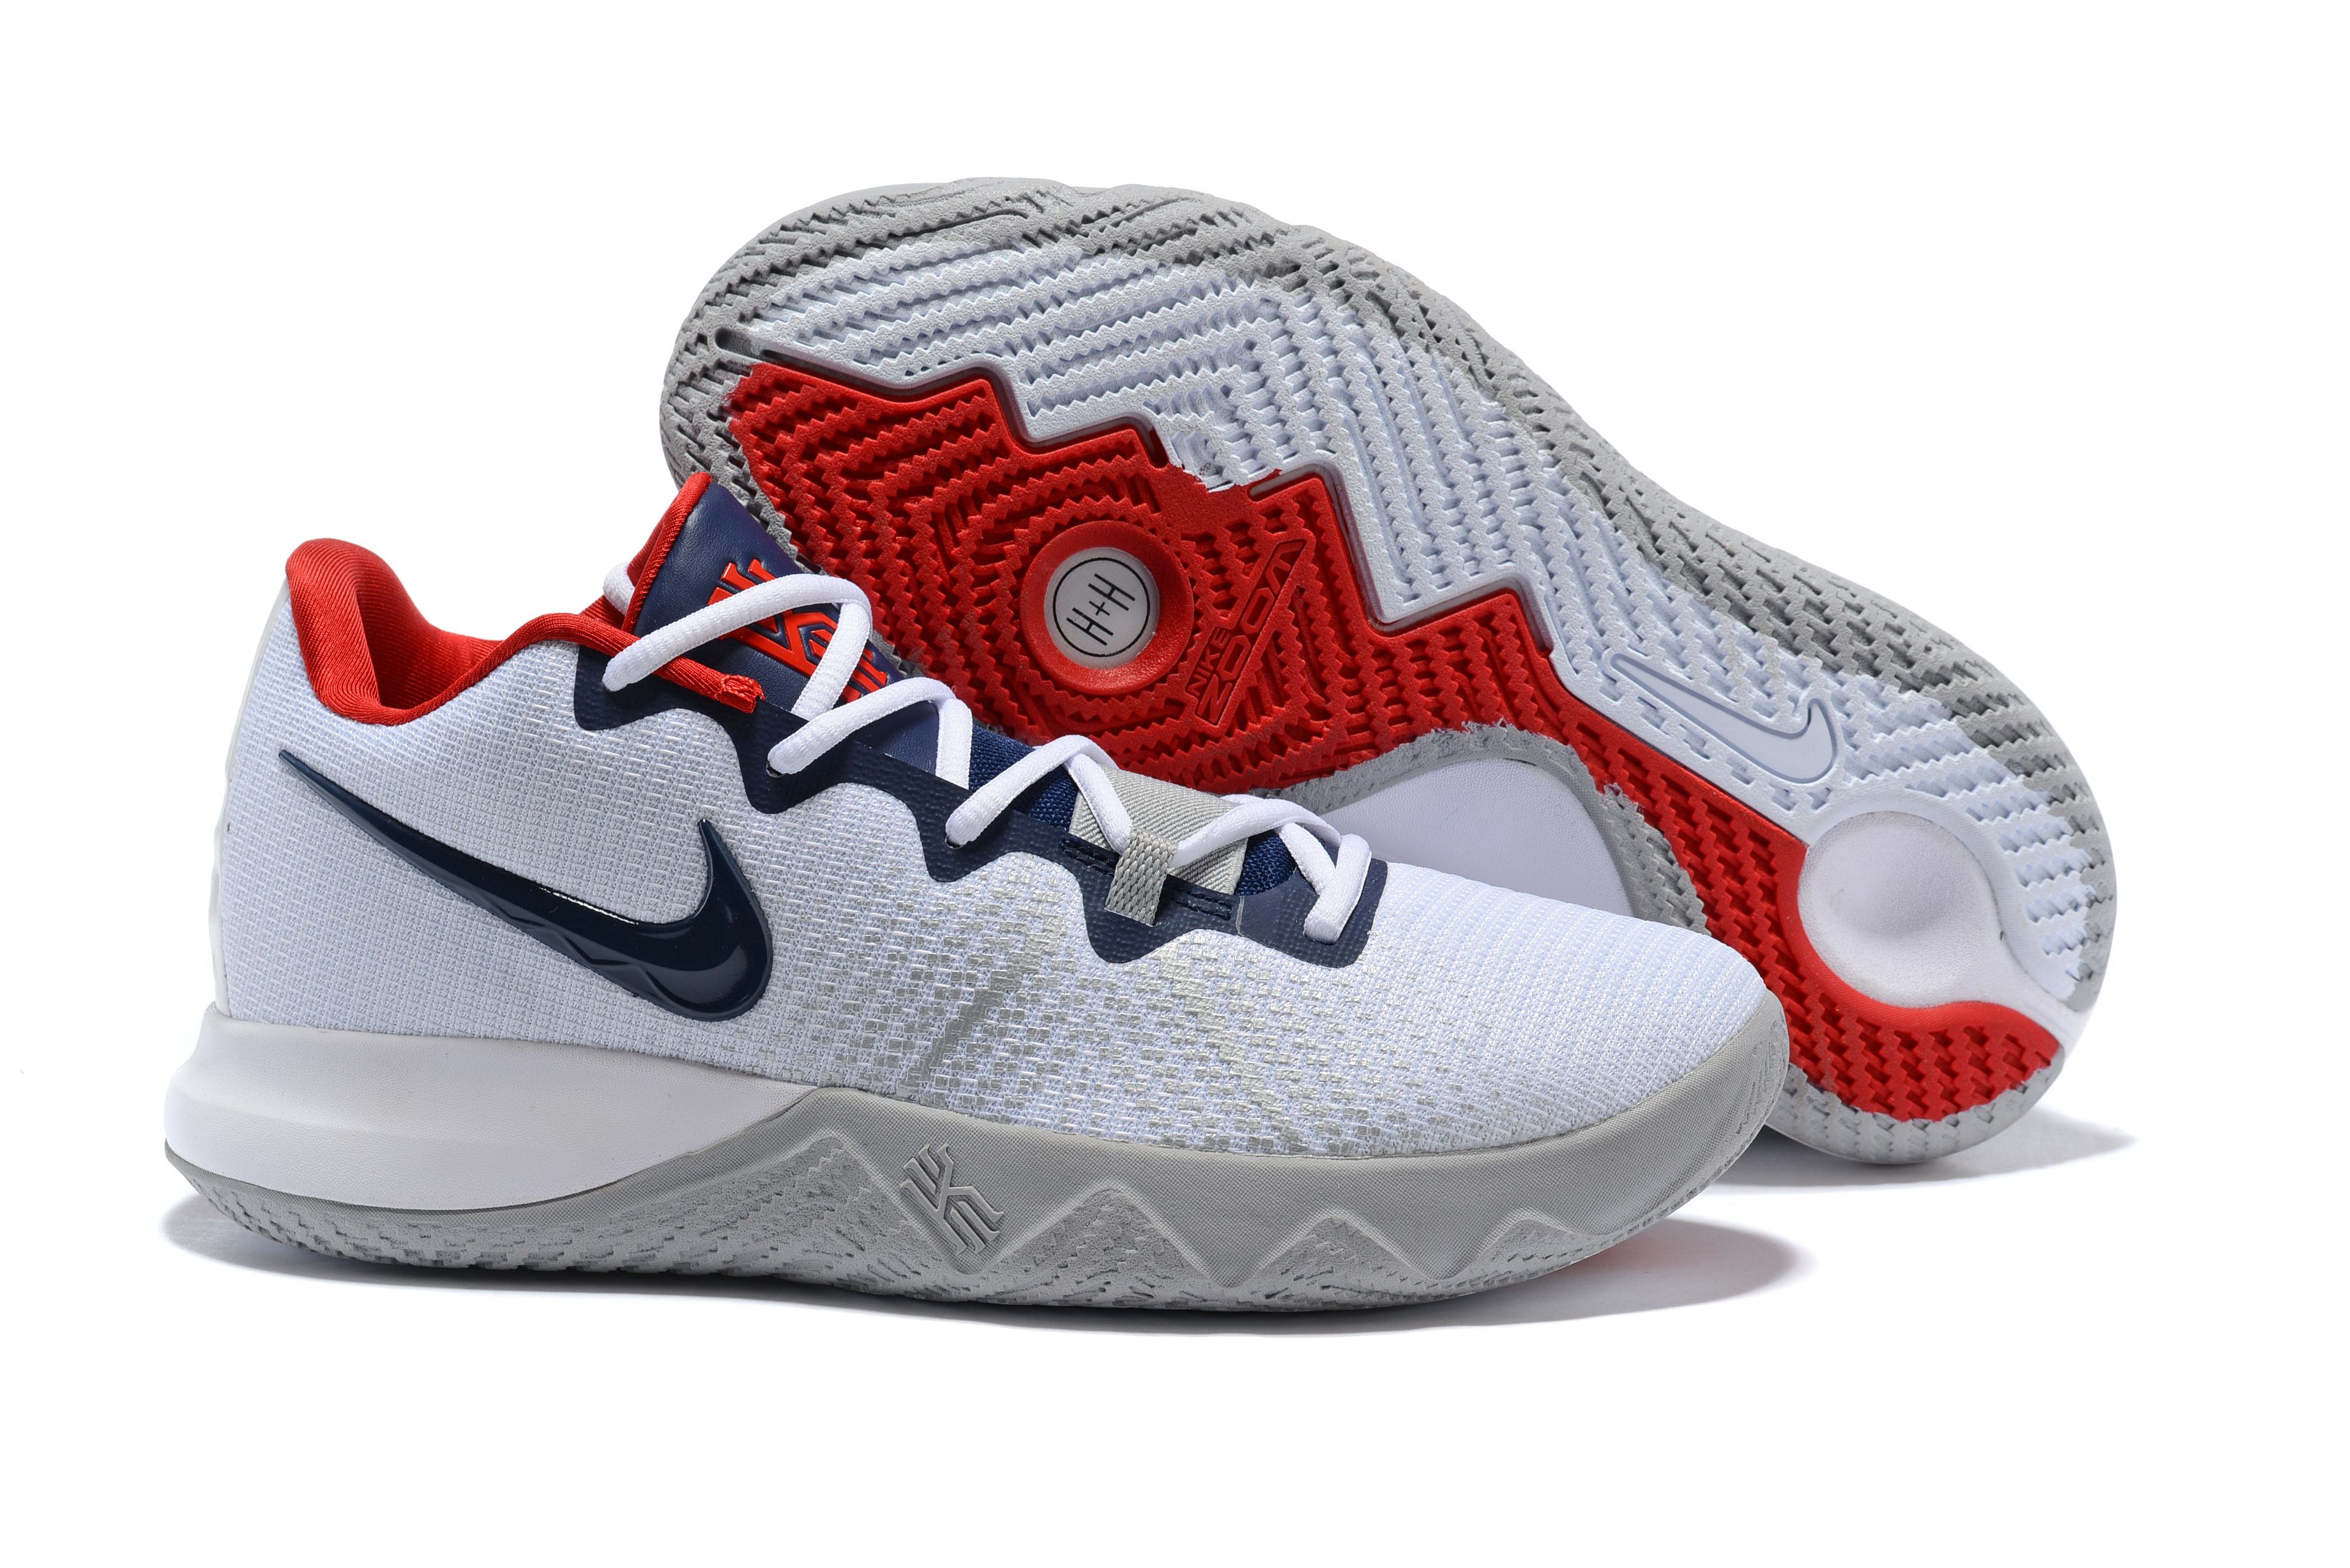 Nike Kyrie Flytrap White Deep Blue Red Shoes